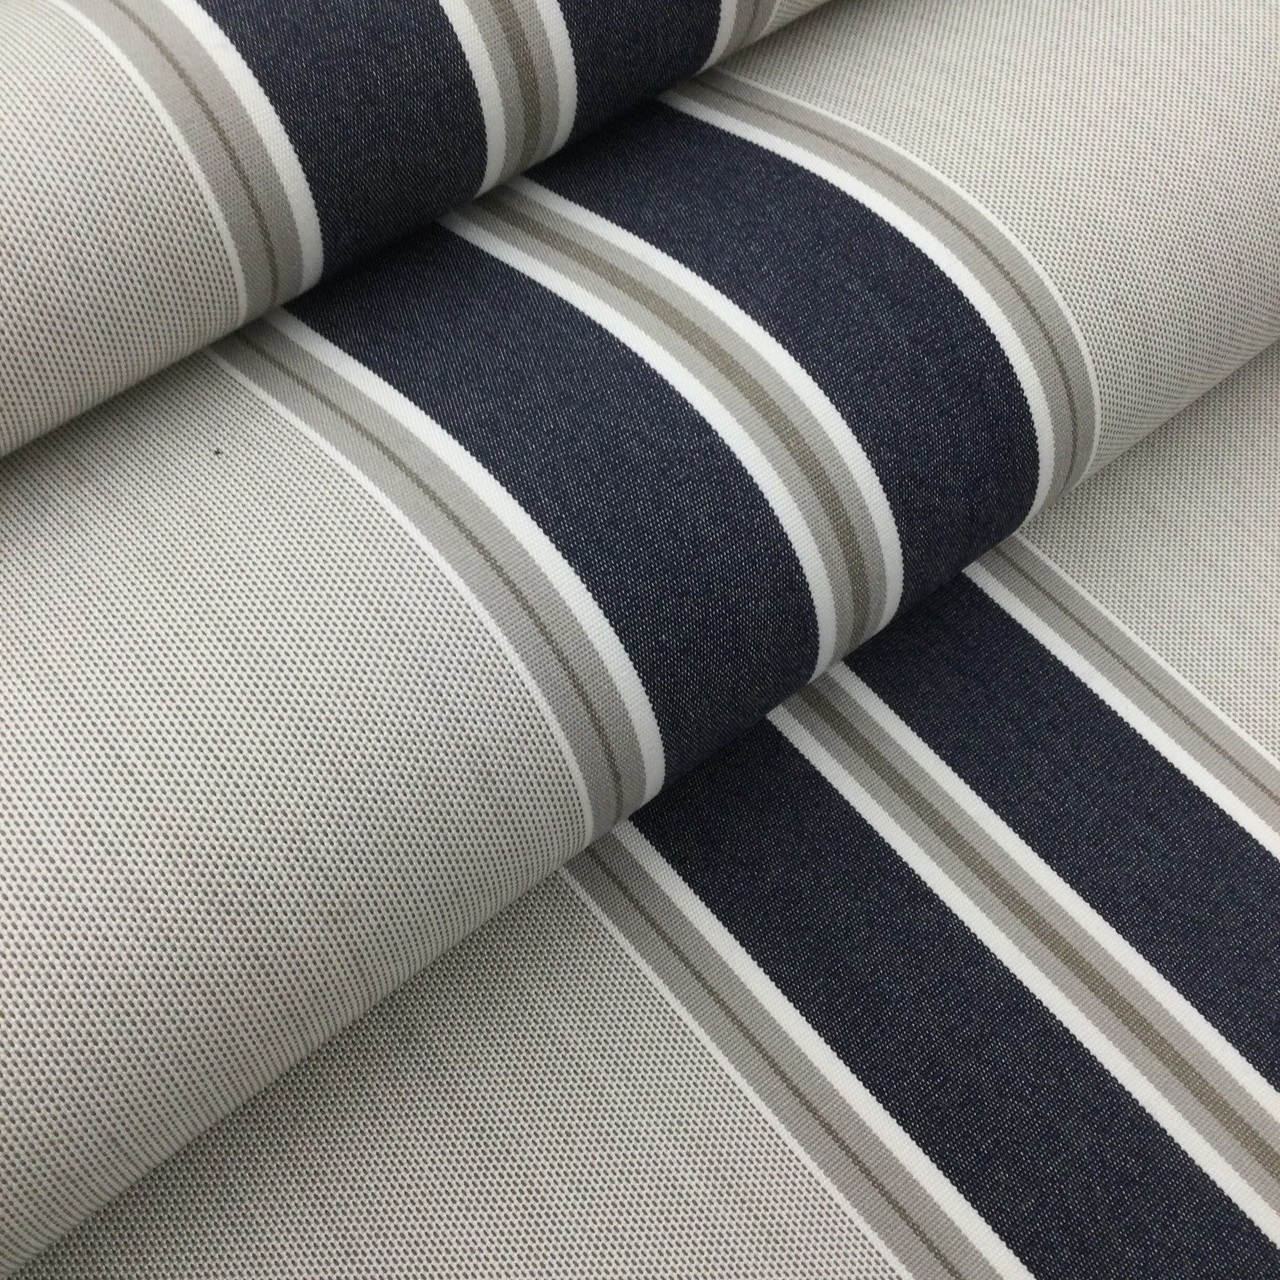 Sunbrella Fabric - Designed for Upholstery, Awning and Marine Applications